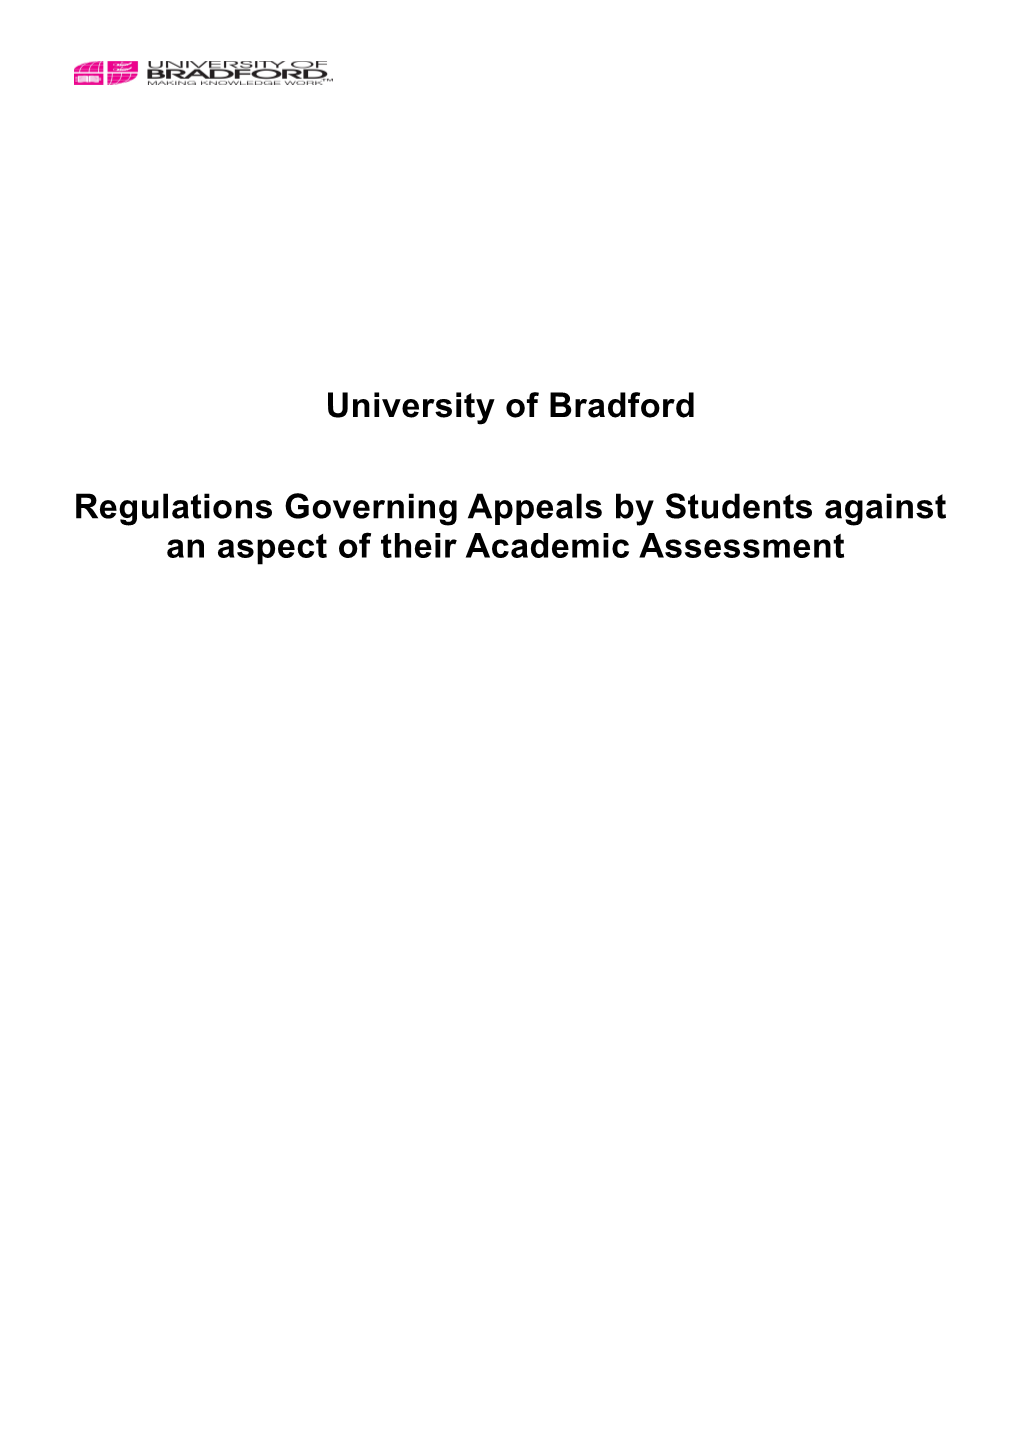 Regulations Governing Appeals by Students Against an Aspect of Their Academic Assessment